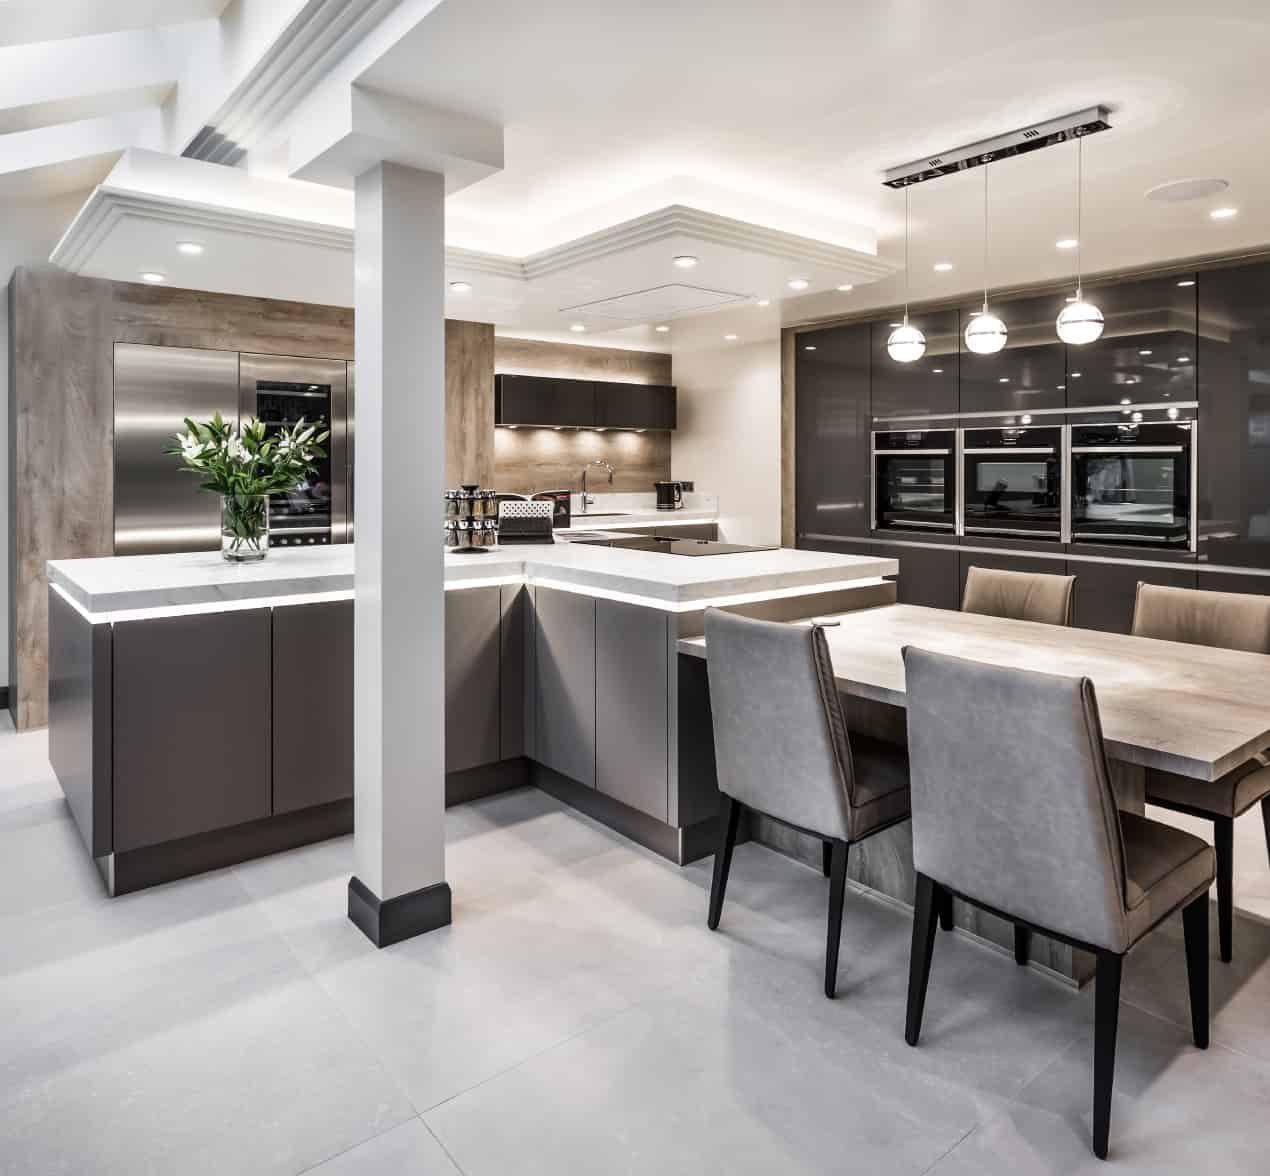 kitchen contemporary modern kitchens stunning island practicality combining